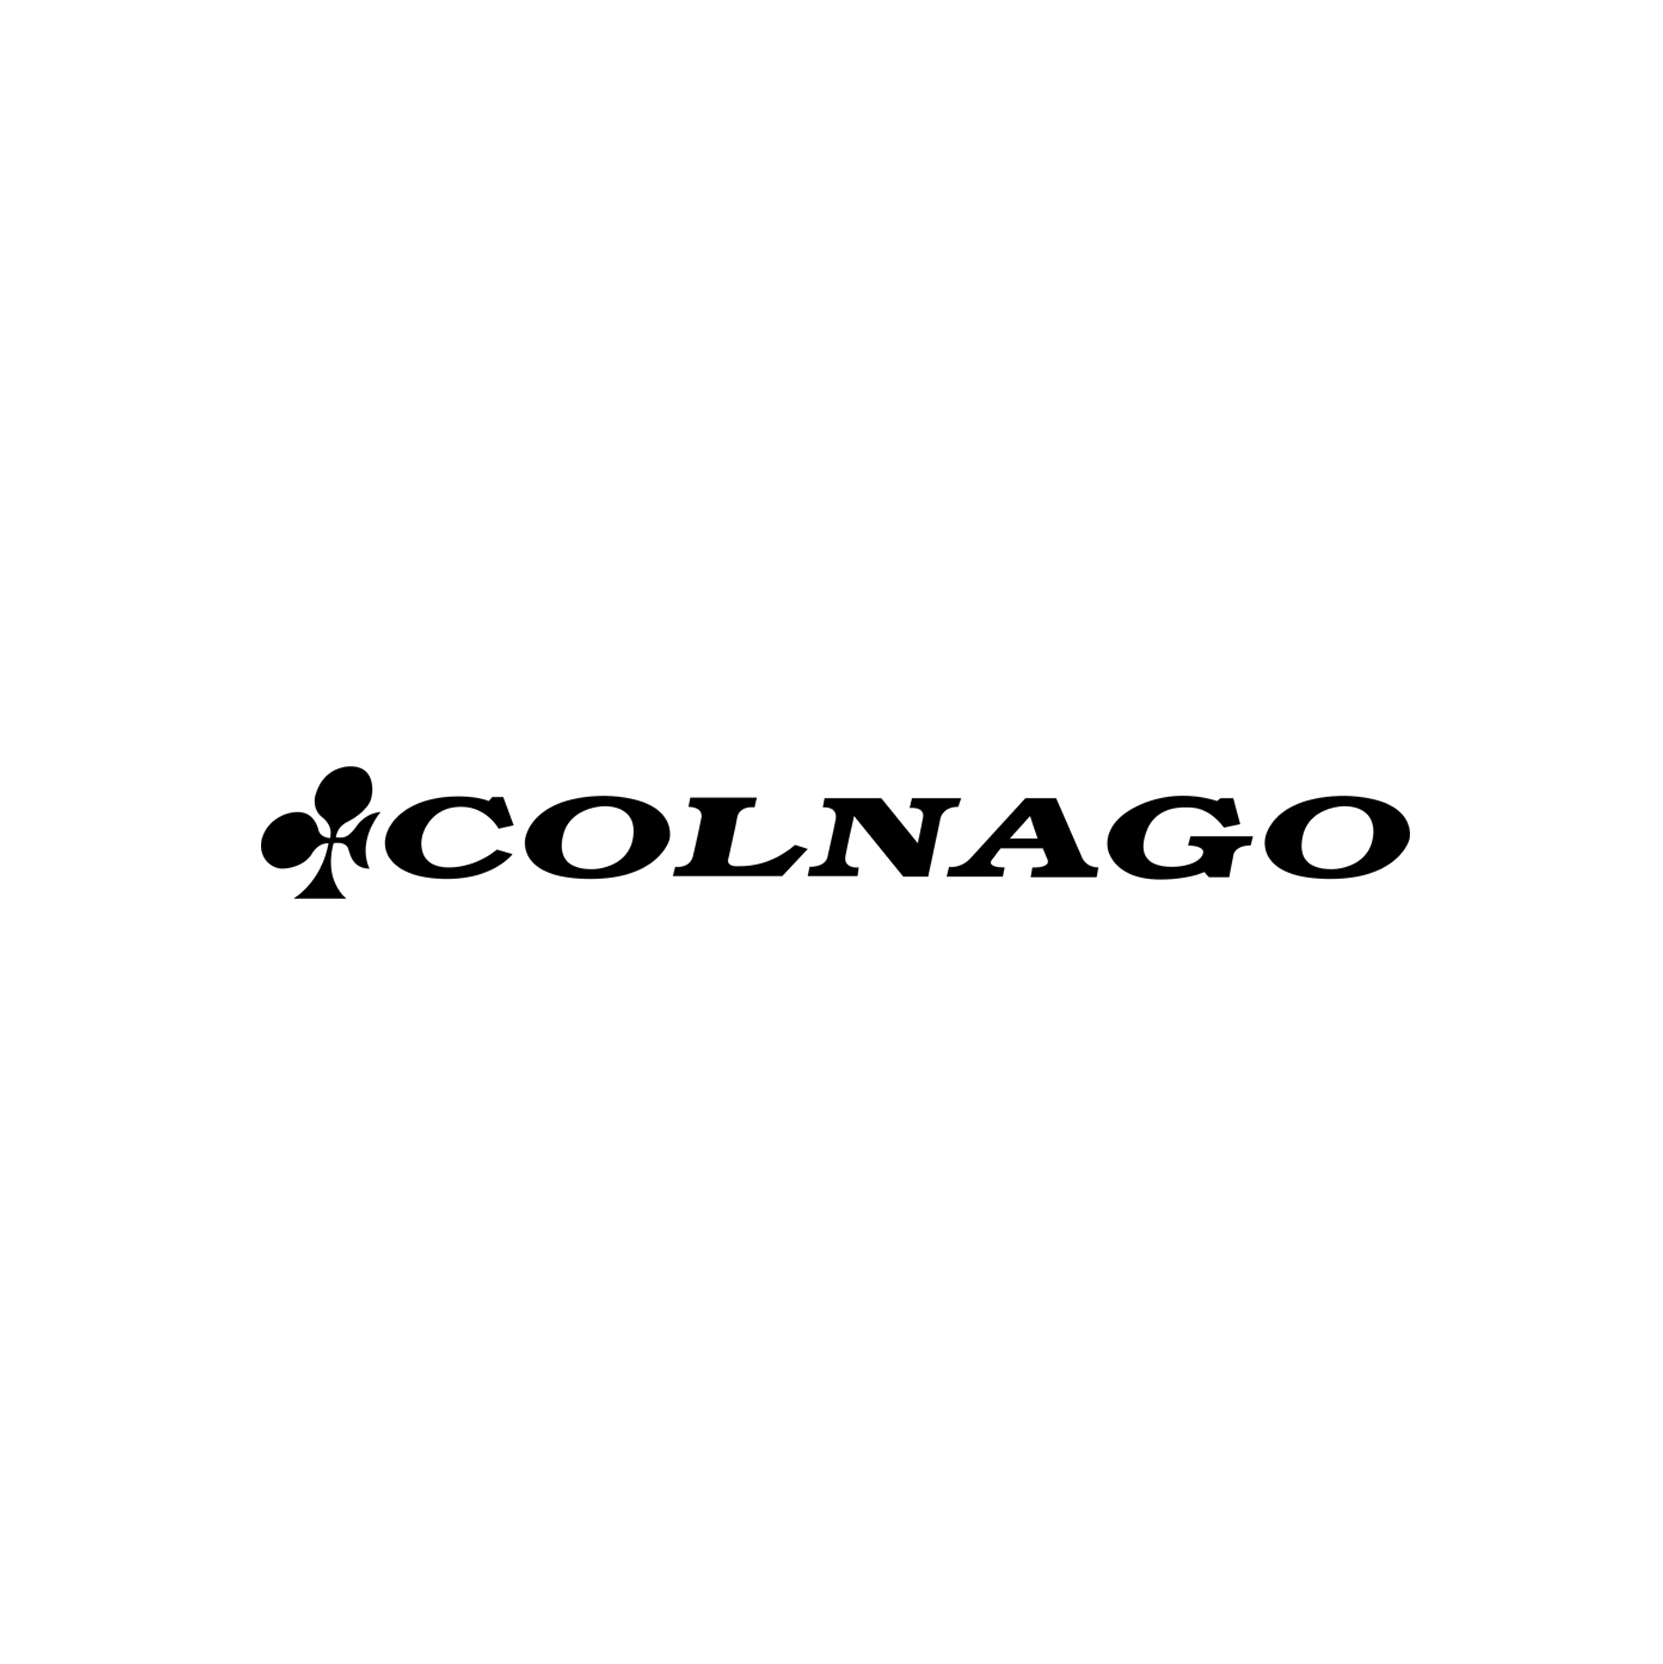 Colnago – The most successful bikes in the world